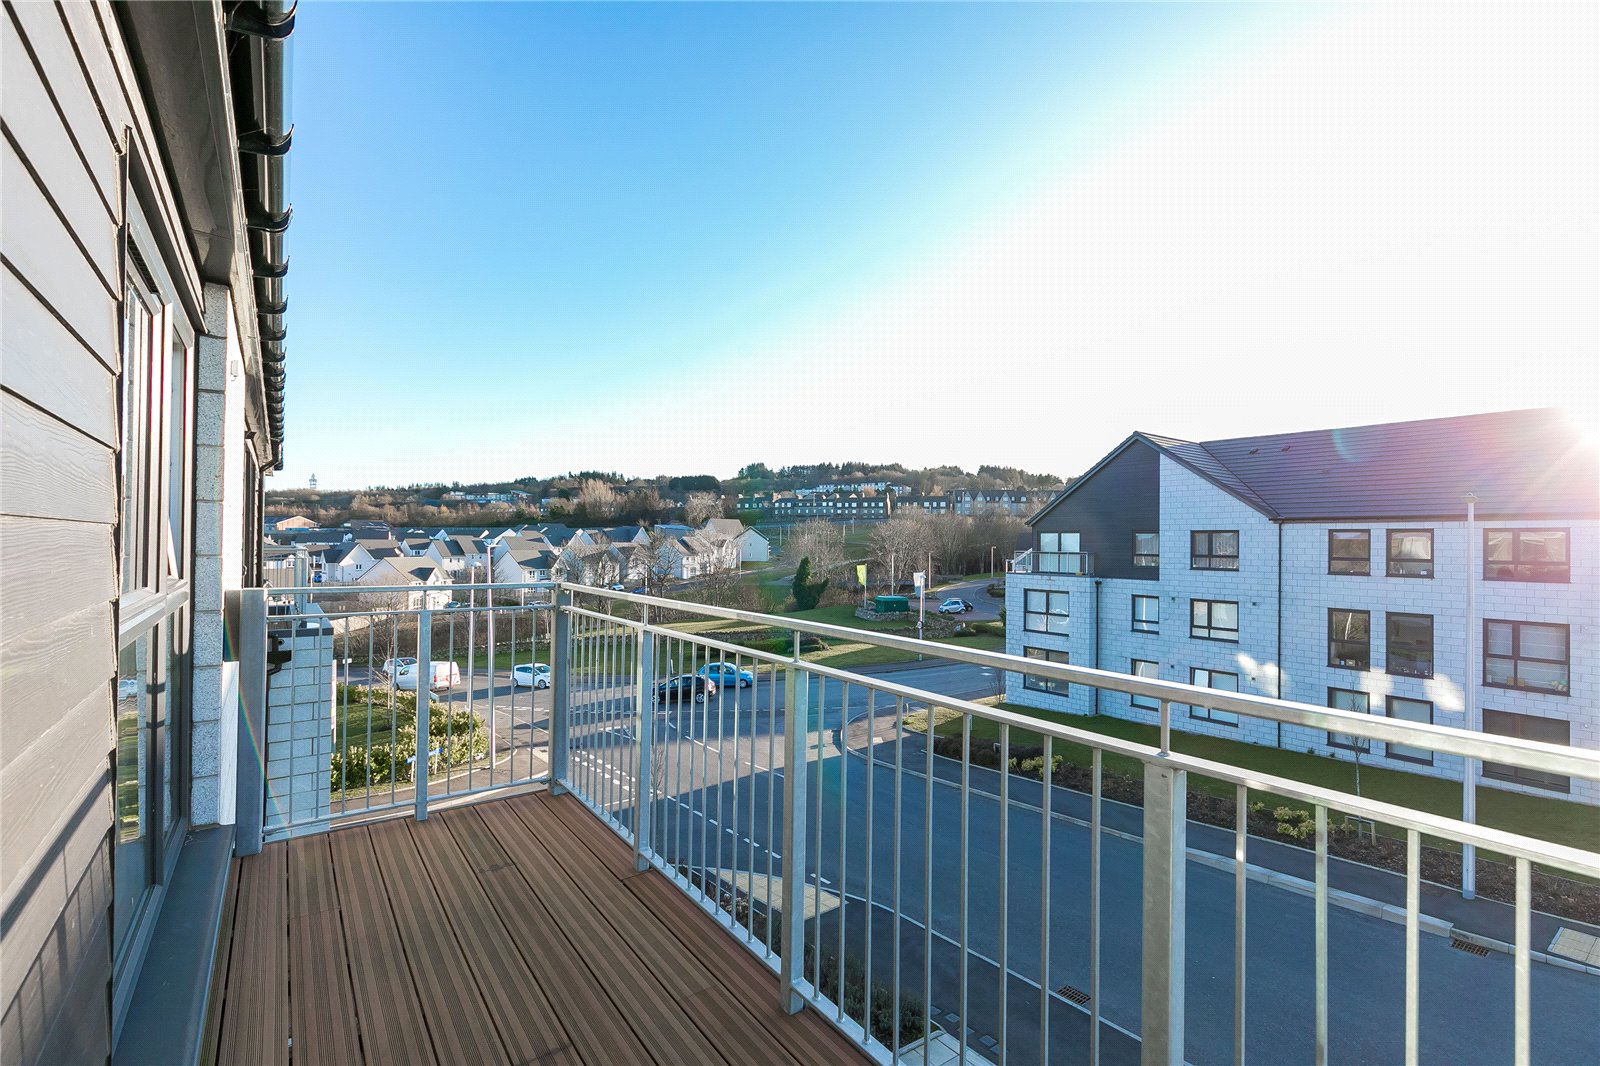 Virtual viewing gets home under offer in 48-hours